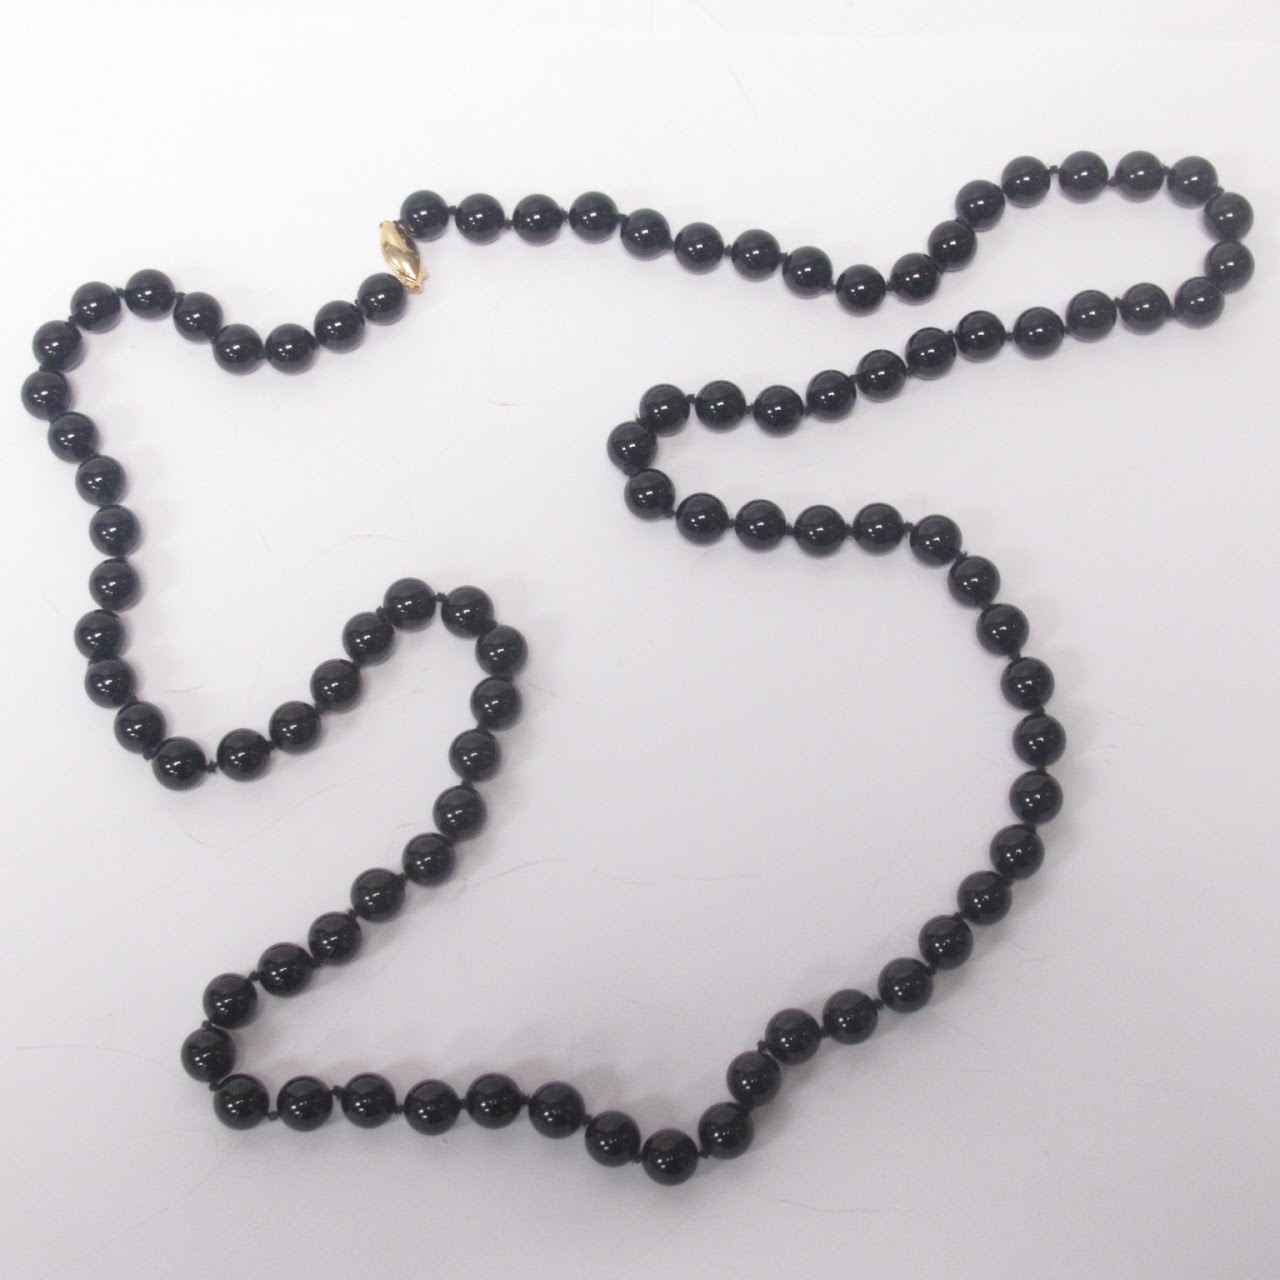 Black Onyx Bead Necklace with 14K Gold Clasp